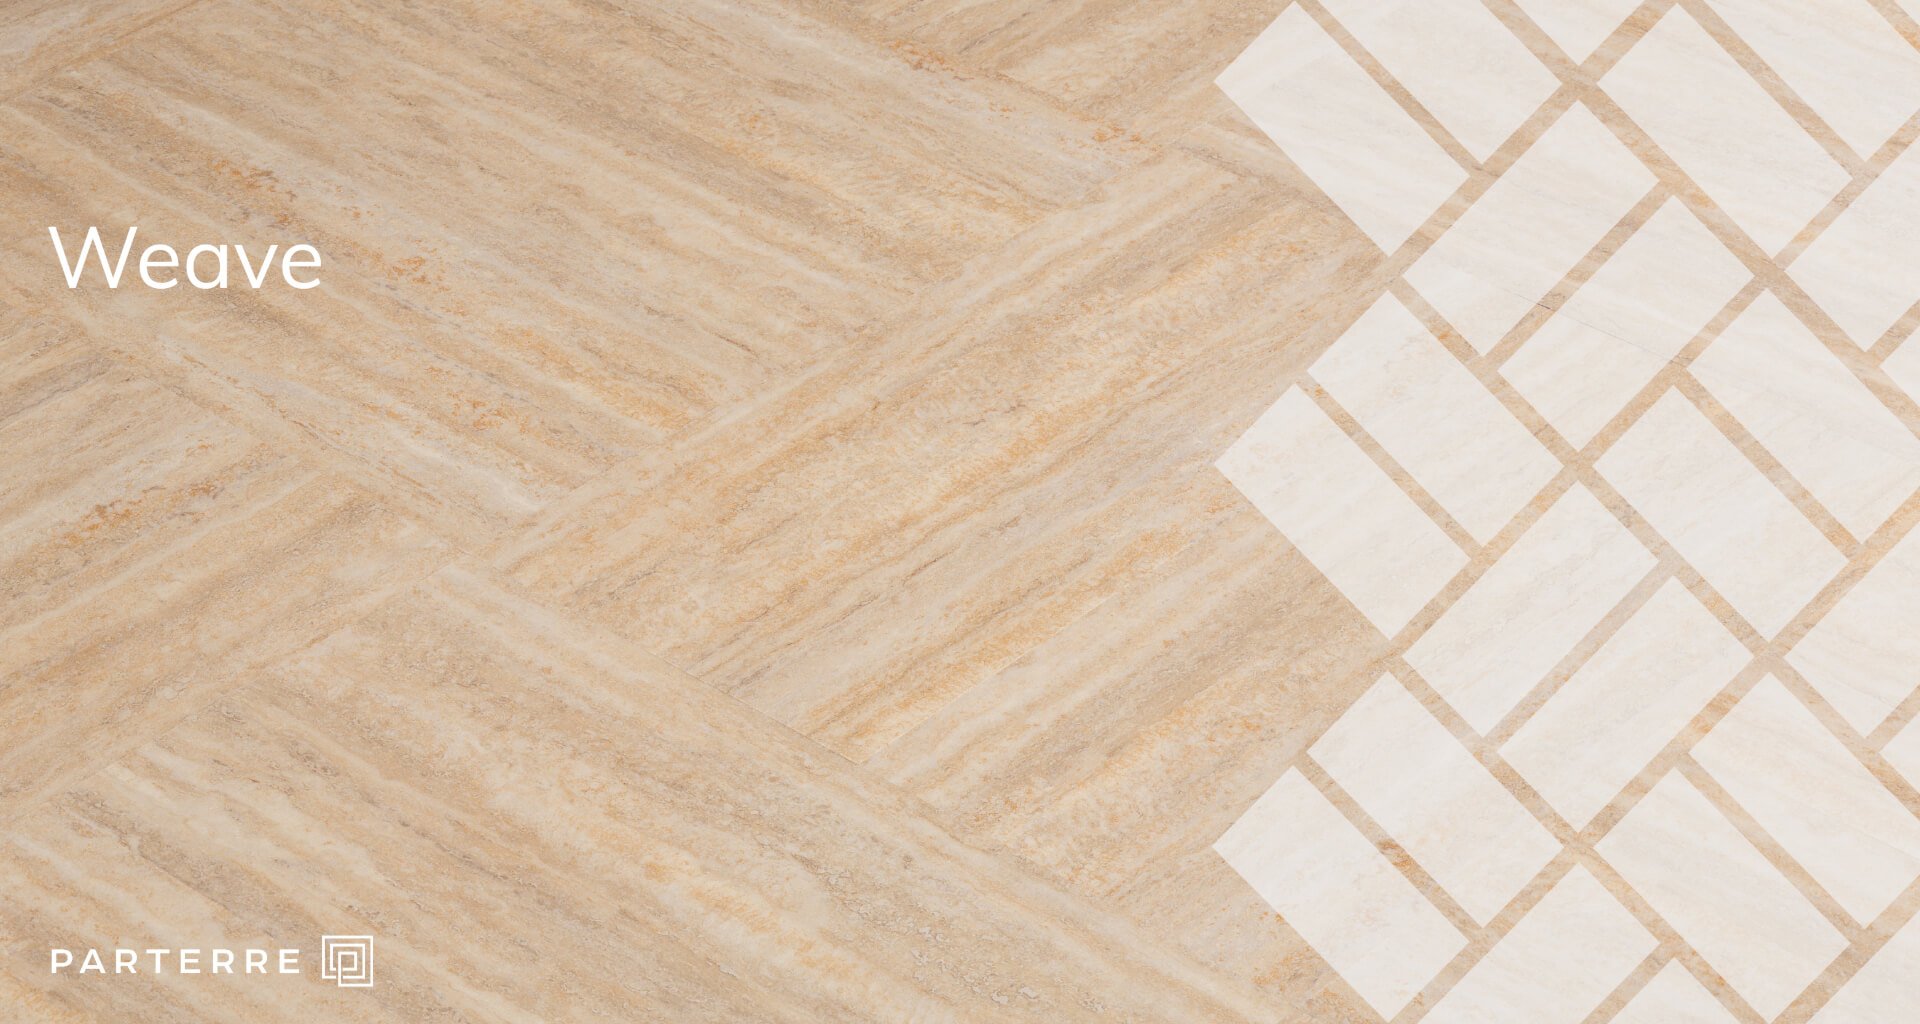 9 Vinyl Flooring Patterns For Your Next Project